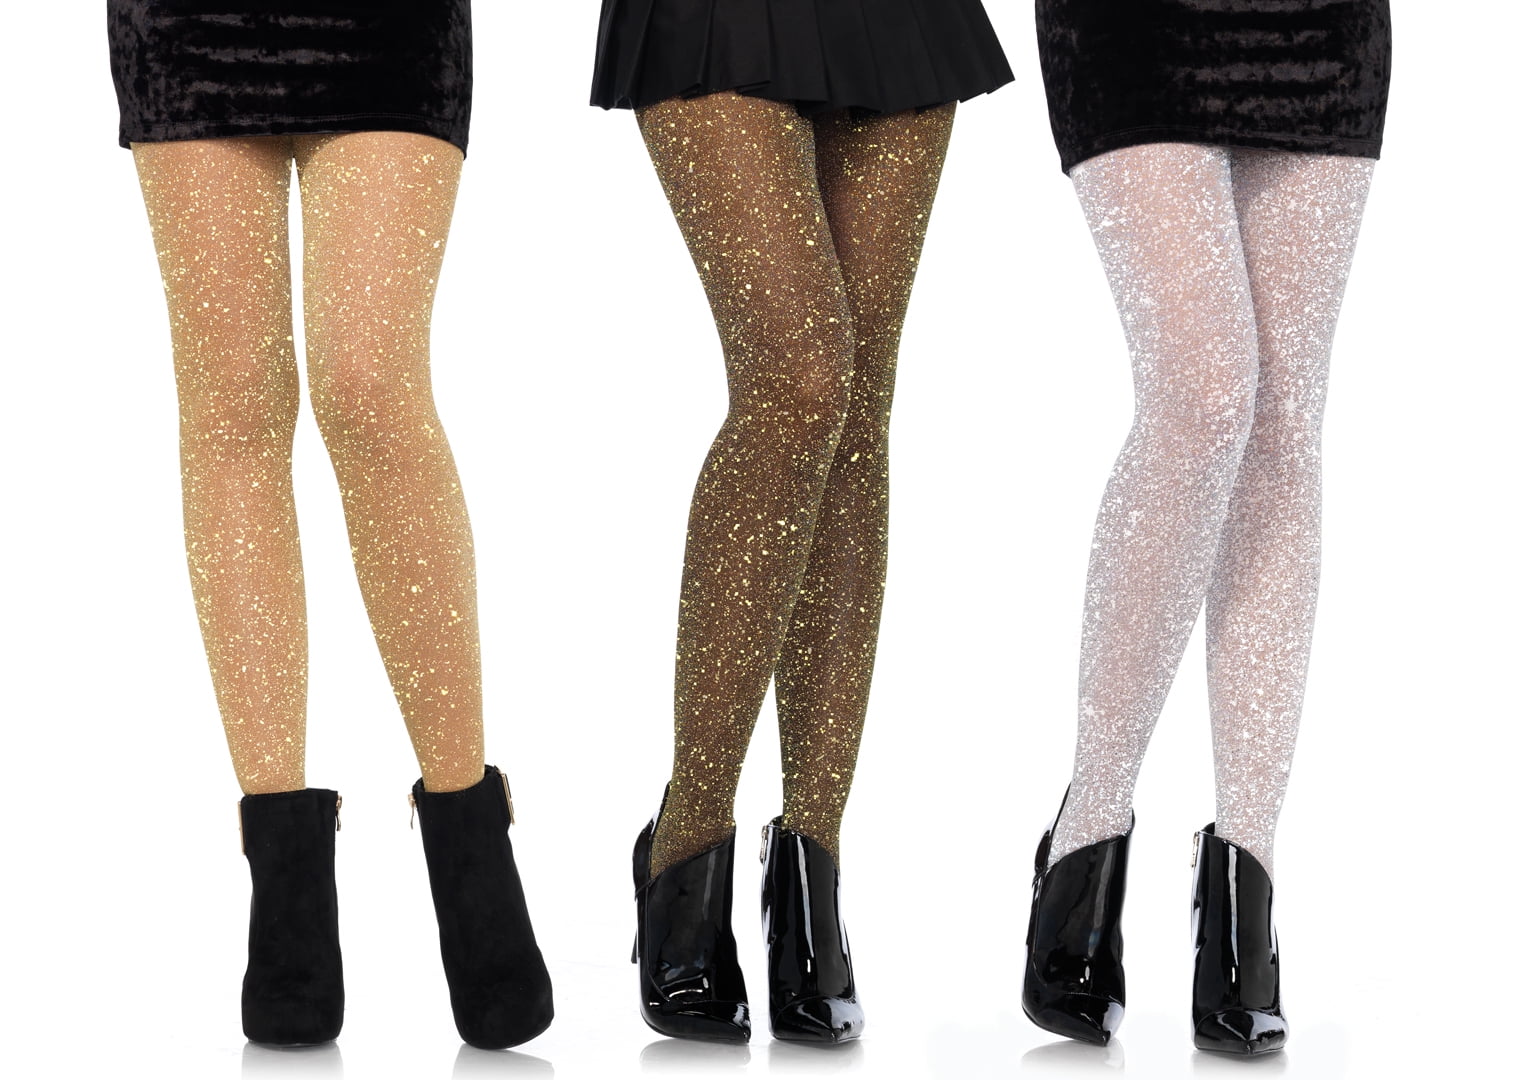 Women's Lurex Sparkly Shiny Glitter Footed Tights, 3 Pairs